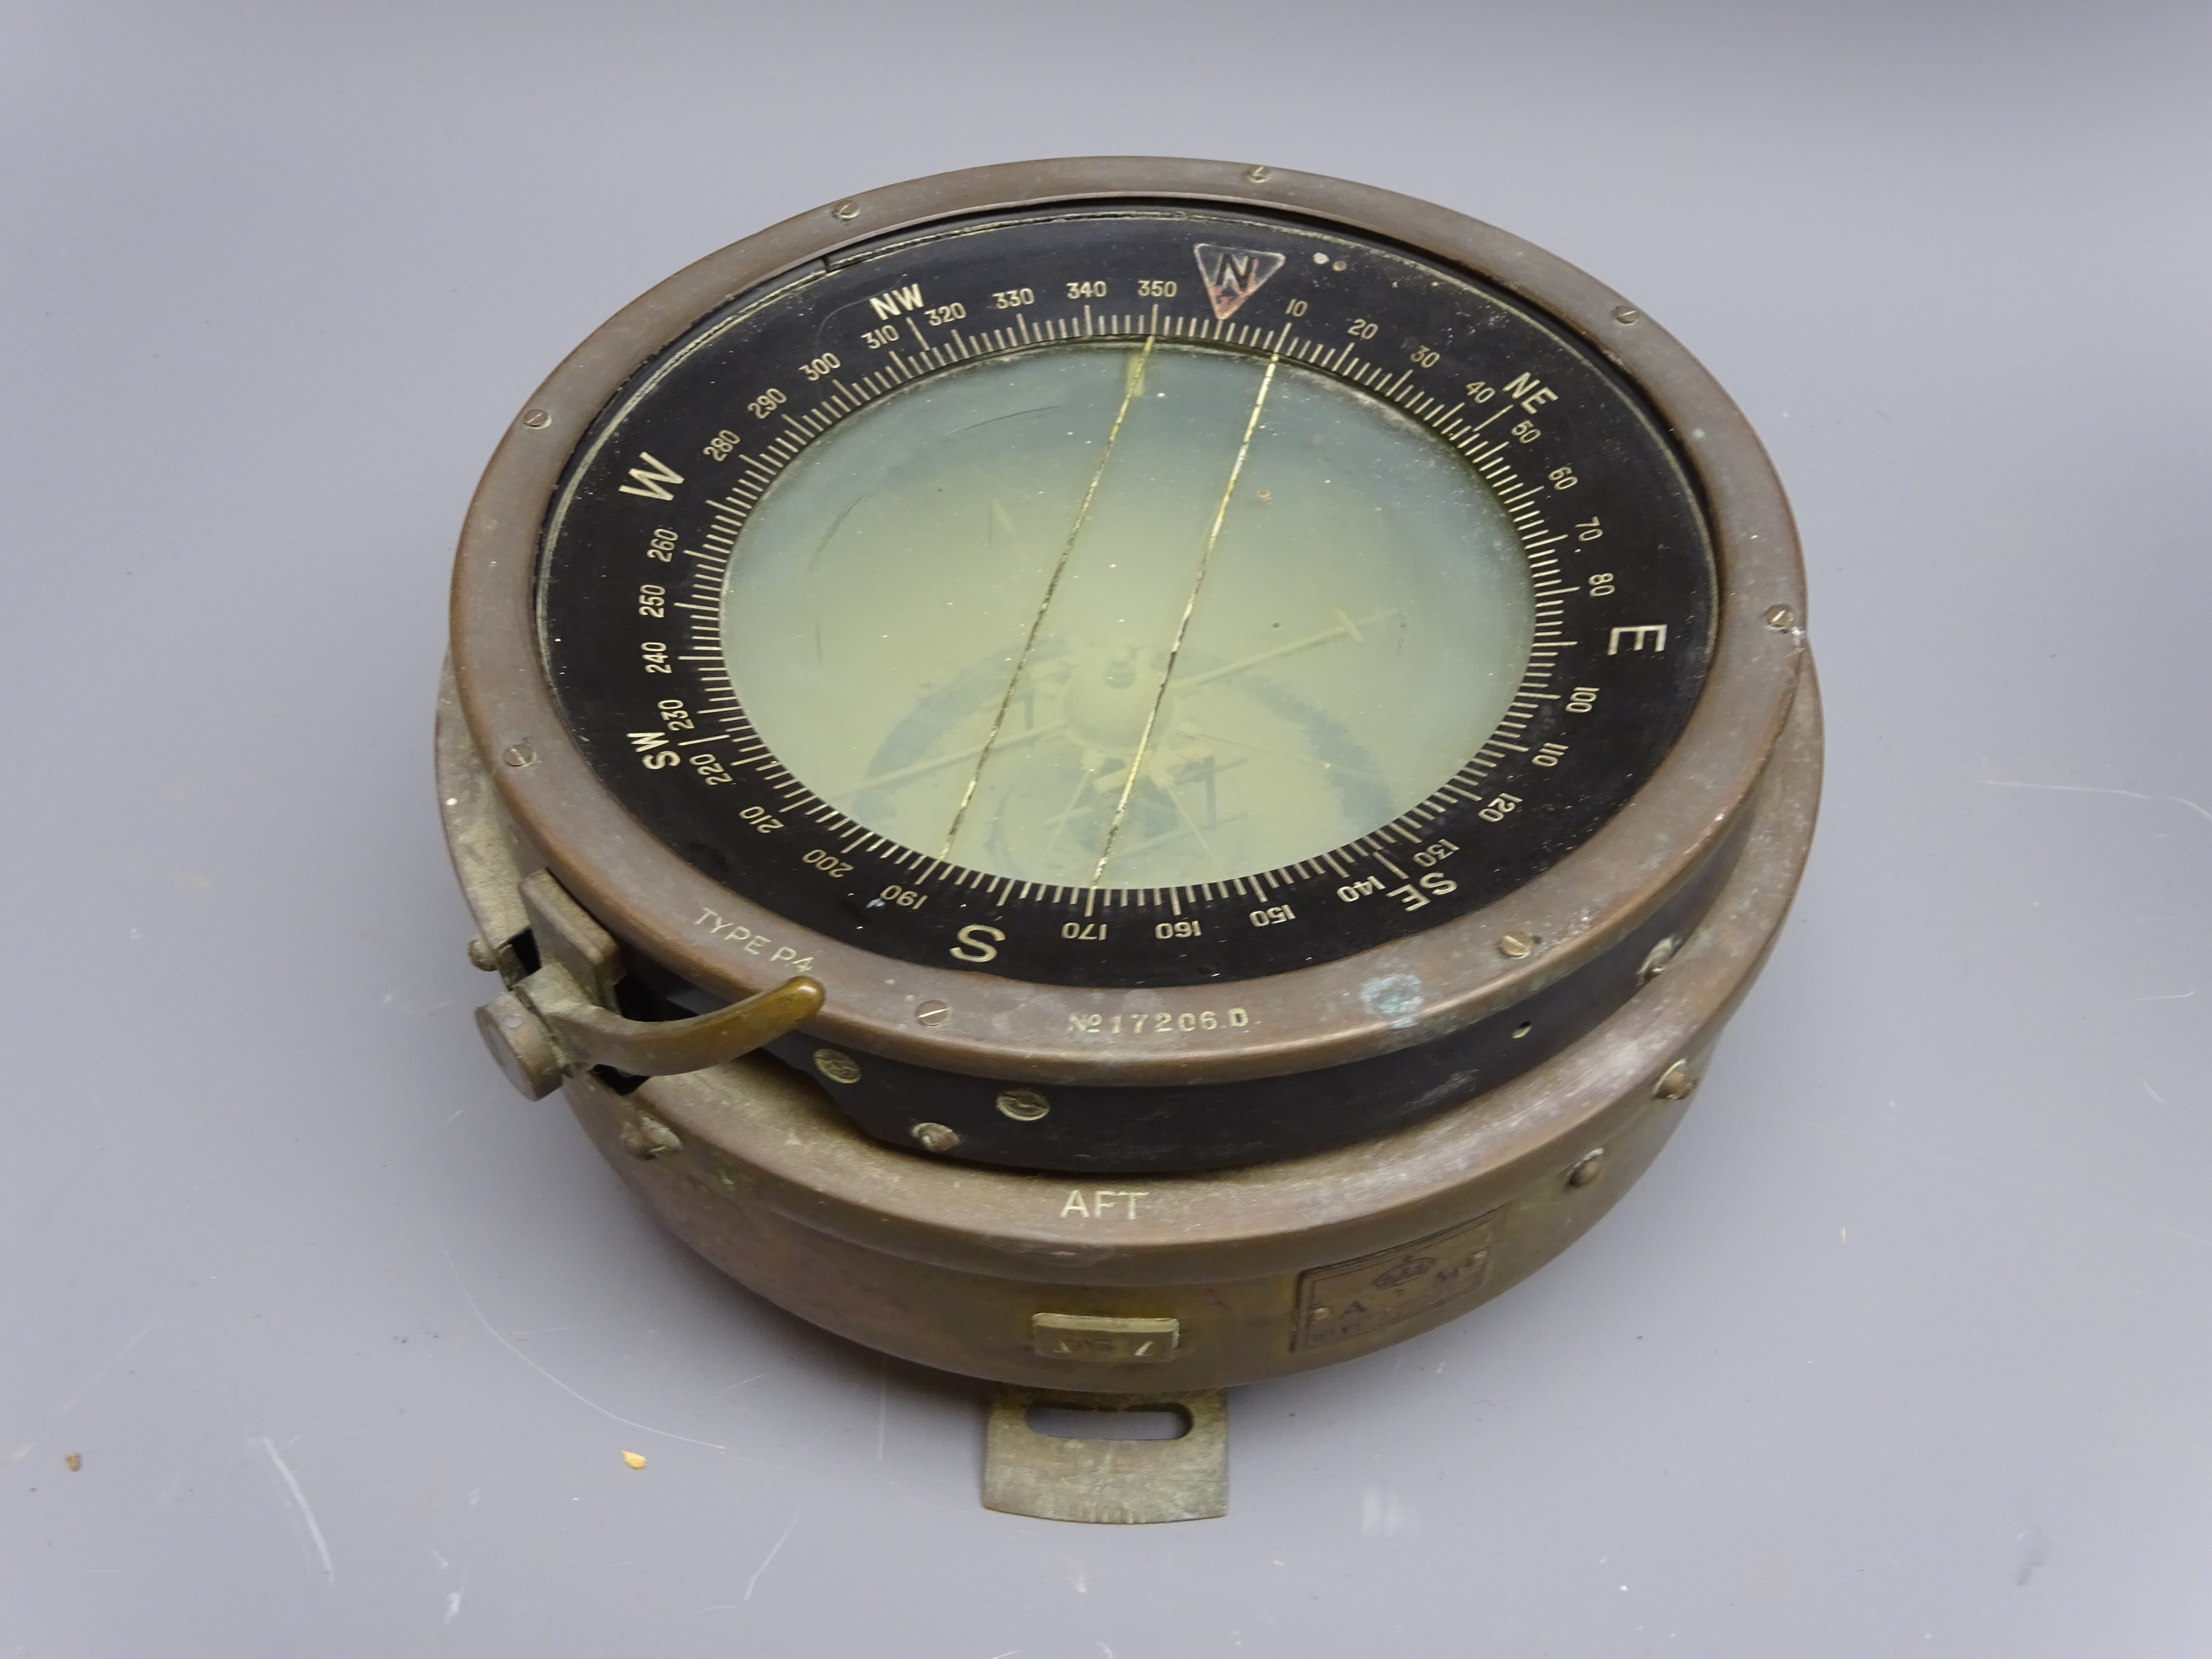 WW2 aircraft compass, bezel stamped Type P4 No.17206D, body stamped AFT with AM plaque REF No.6A/0.